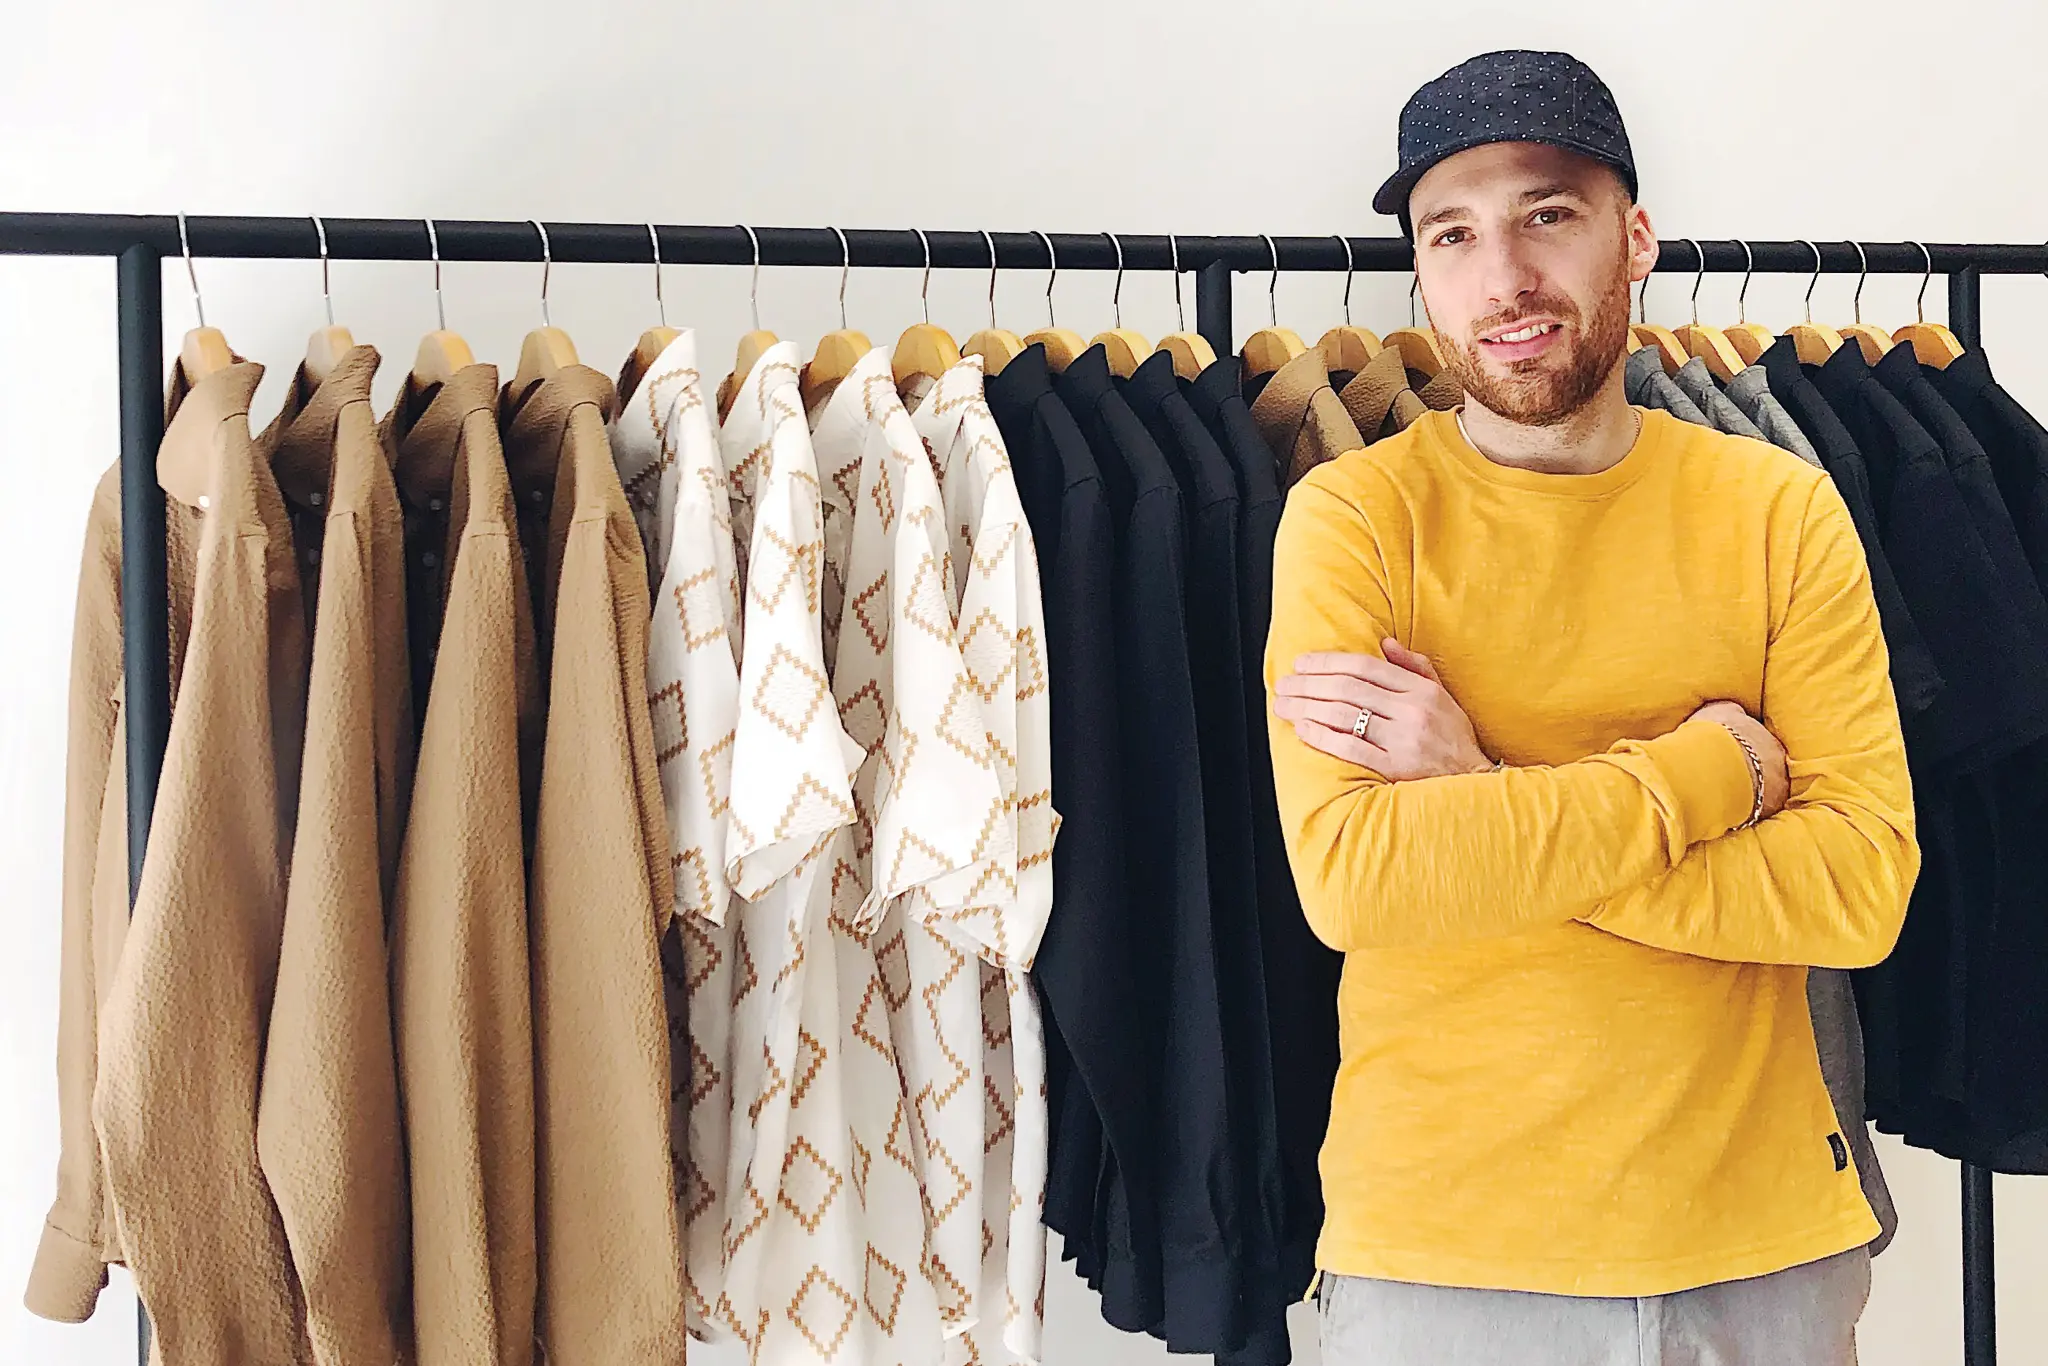 OUTCLASS founder Matteo Sgaramella poses with a rack of clothes from his label.